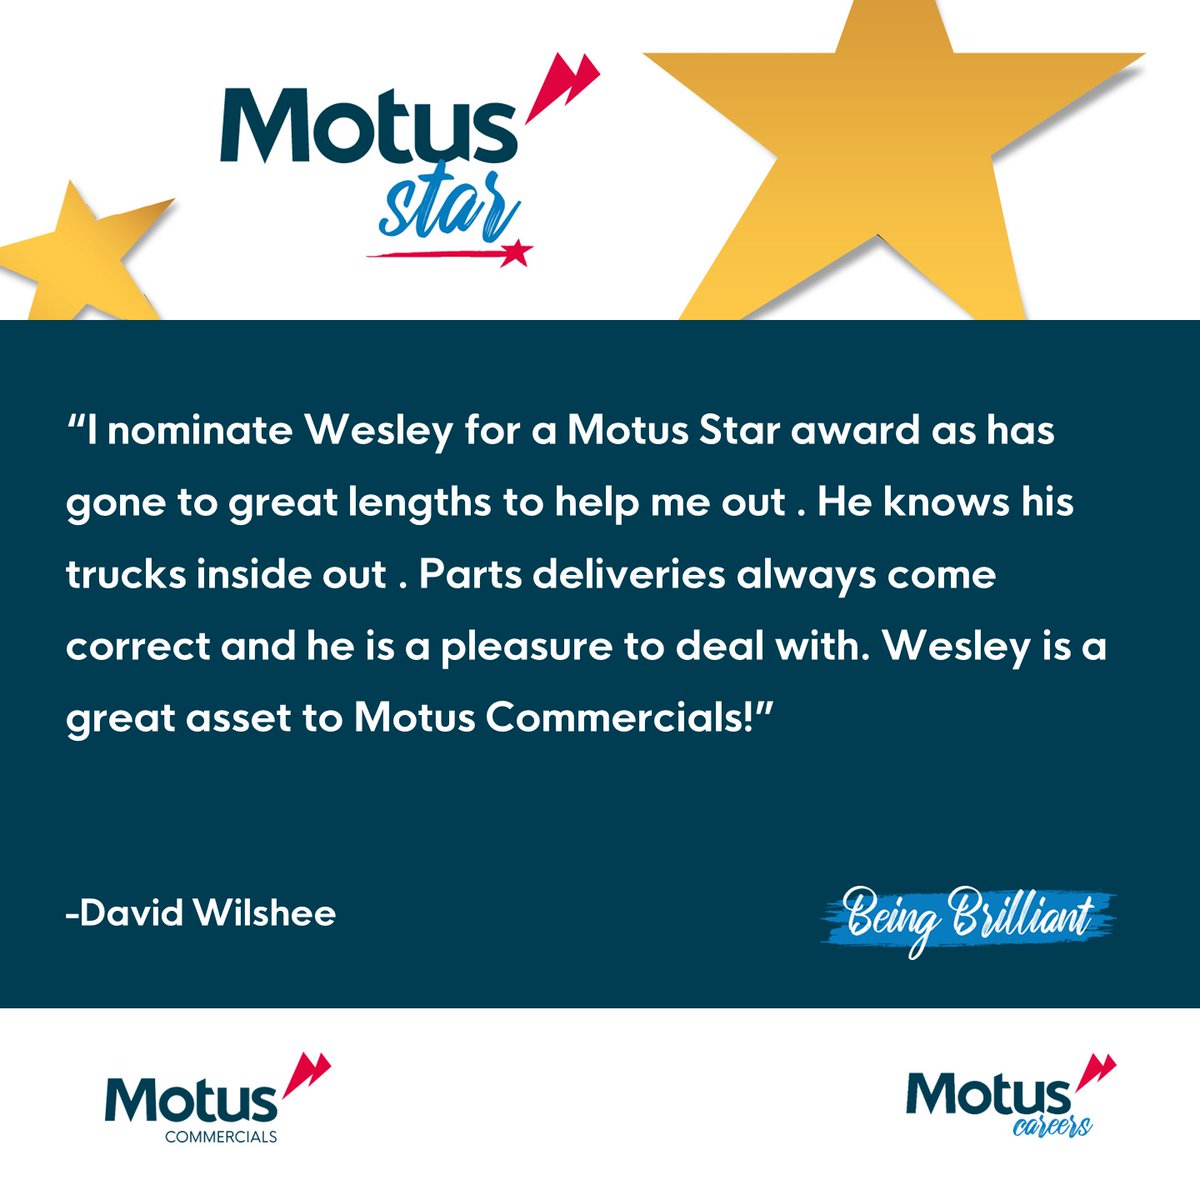 Let's start the week with a STAR! ⭐ Congratulations to Wesley, from Motus Commercials Derby, for this fantastic Motus Star nomination! 𝗙𝗶𝗻𝗱 𝗼𝘂𝘁 𝗺𝗼𝗿𝗲 𝗮𝗻𝗱 𝗻𝗼𝗺𝗶𝗻𝗮𝘁𝗲 𝘆𝗼𝘂𝗿 𝗠𝗼𝘁𝘂𝘀 𝗦𝘁𝗮𝗿 ➡️ loom.ly/j41MT_s #MondayMotivation #MotusCommercials